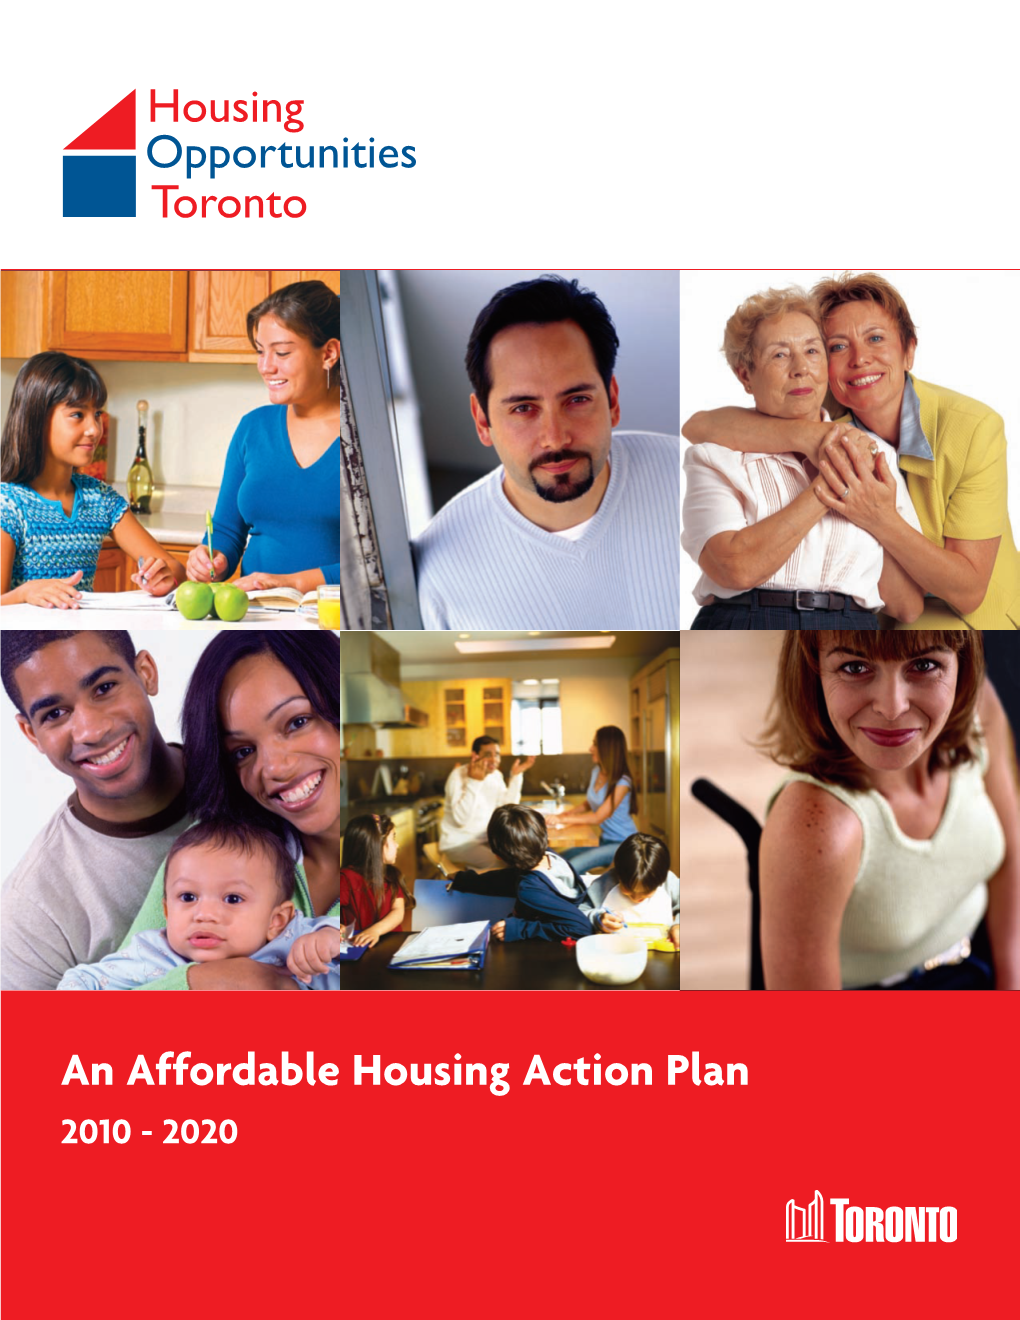 Housing Opportunities Toronto an Affordable Housing Action Plan